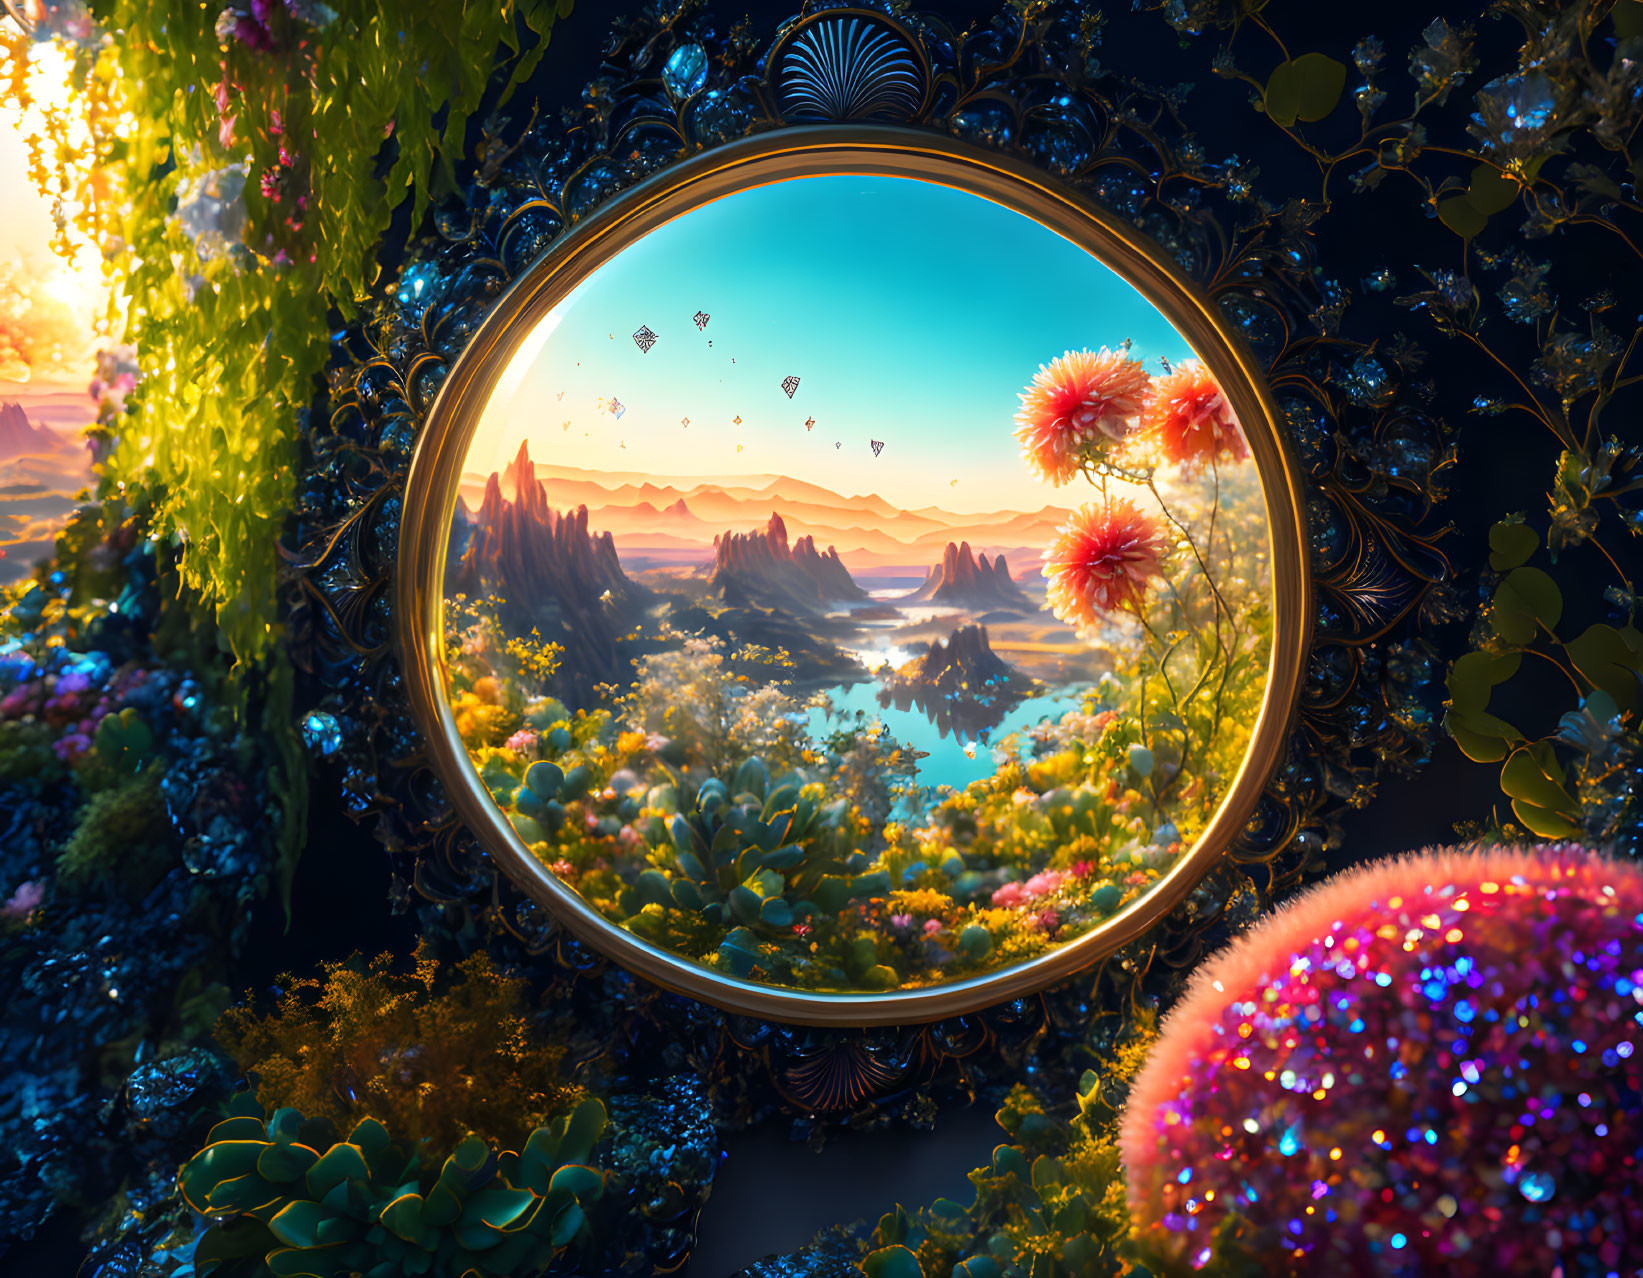 Ornate mirror reflecting fantastical landscape with flowers, lake, balloons, sunset